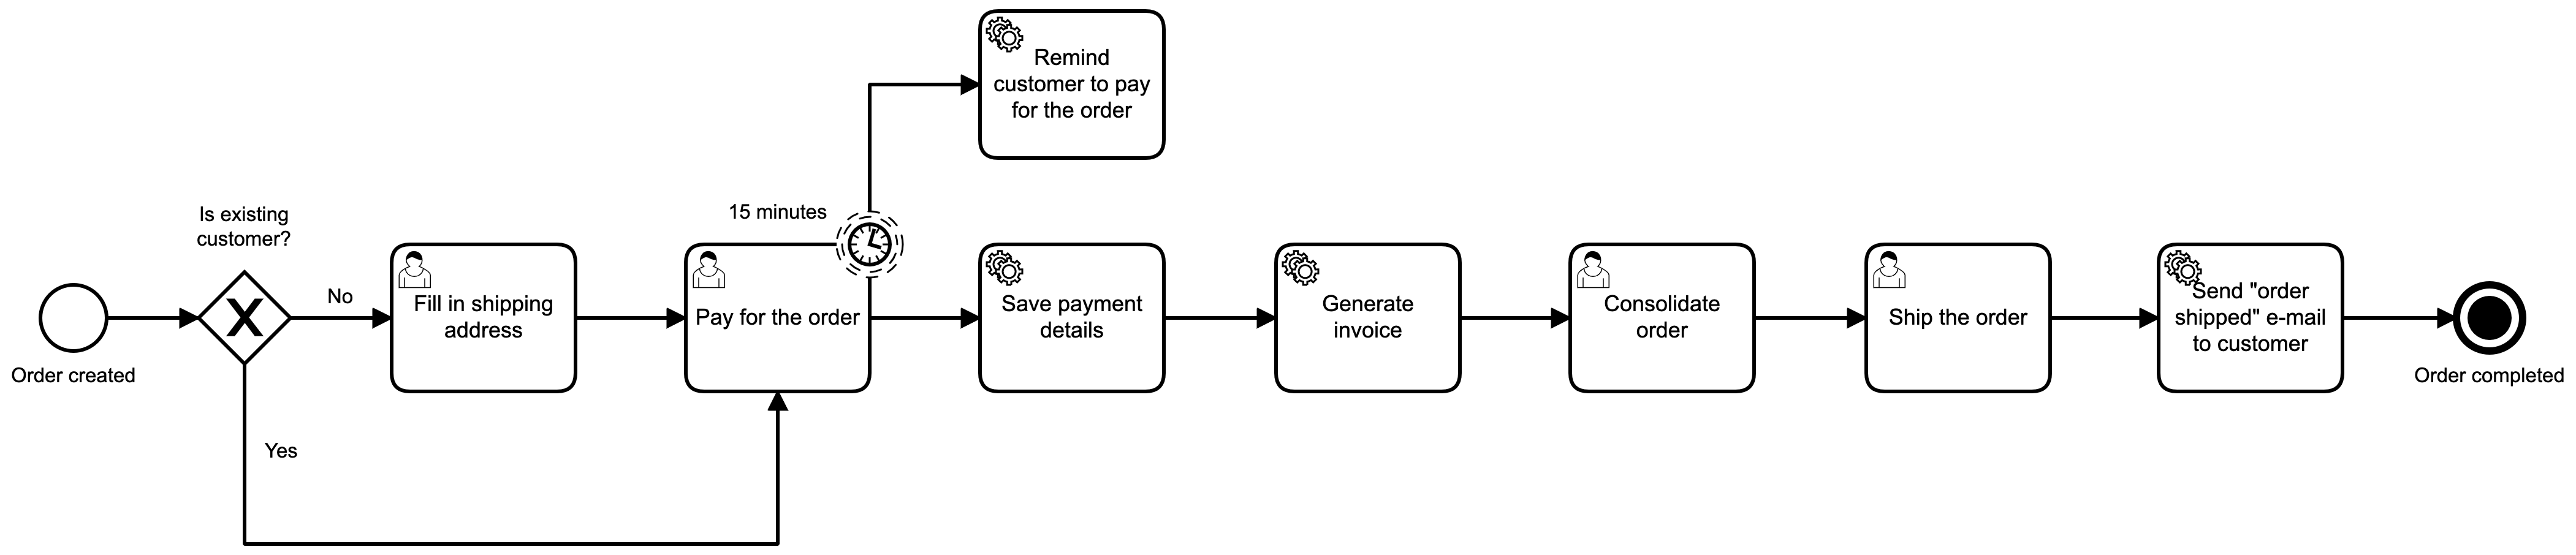 Camunda flow with added service task to save payment details when going through checkout process